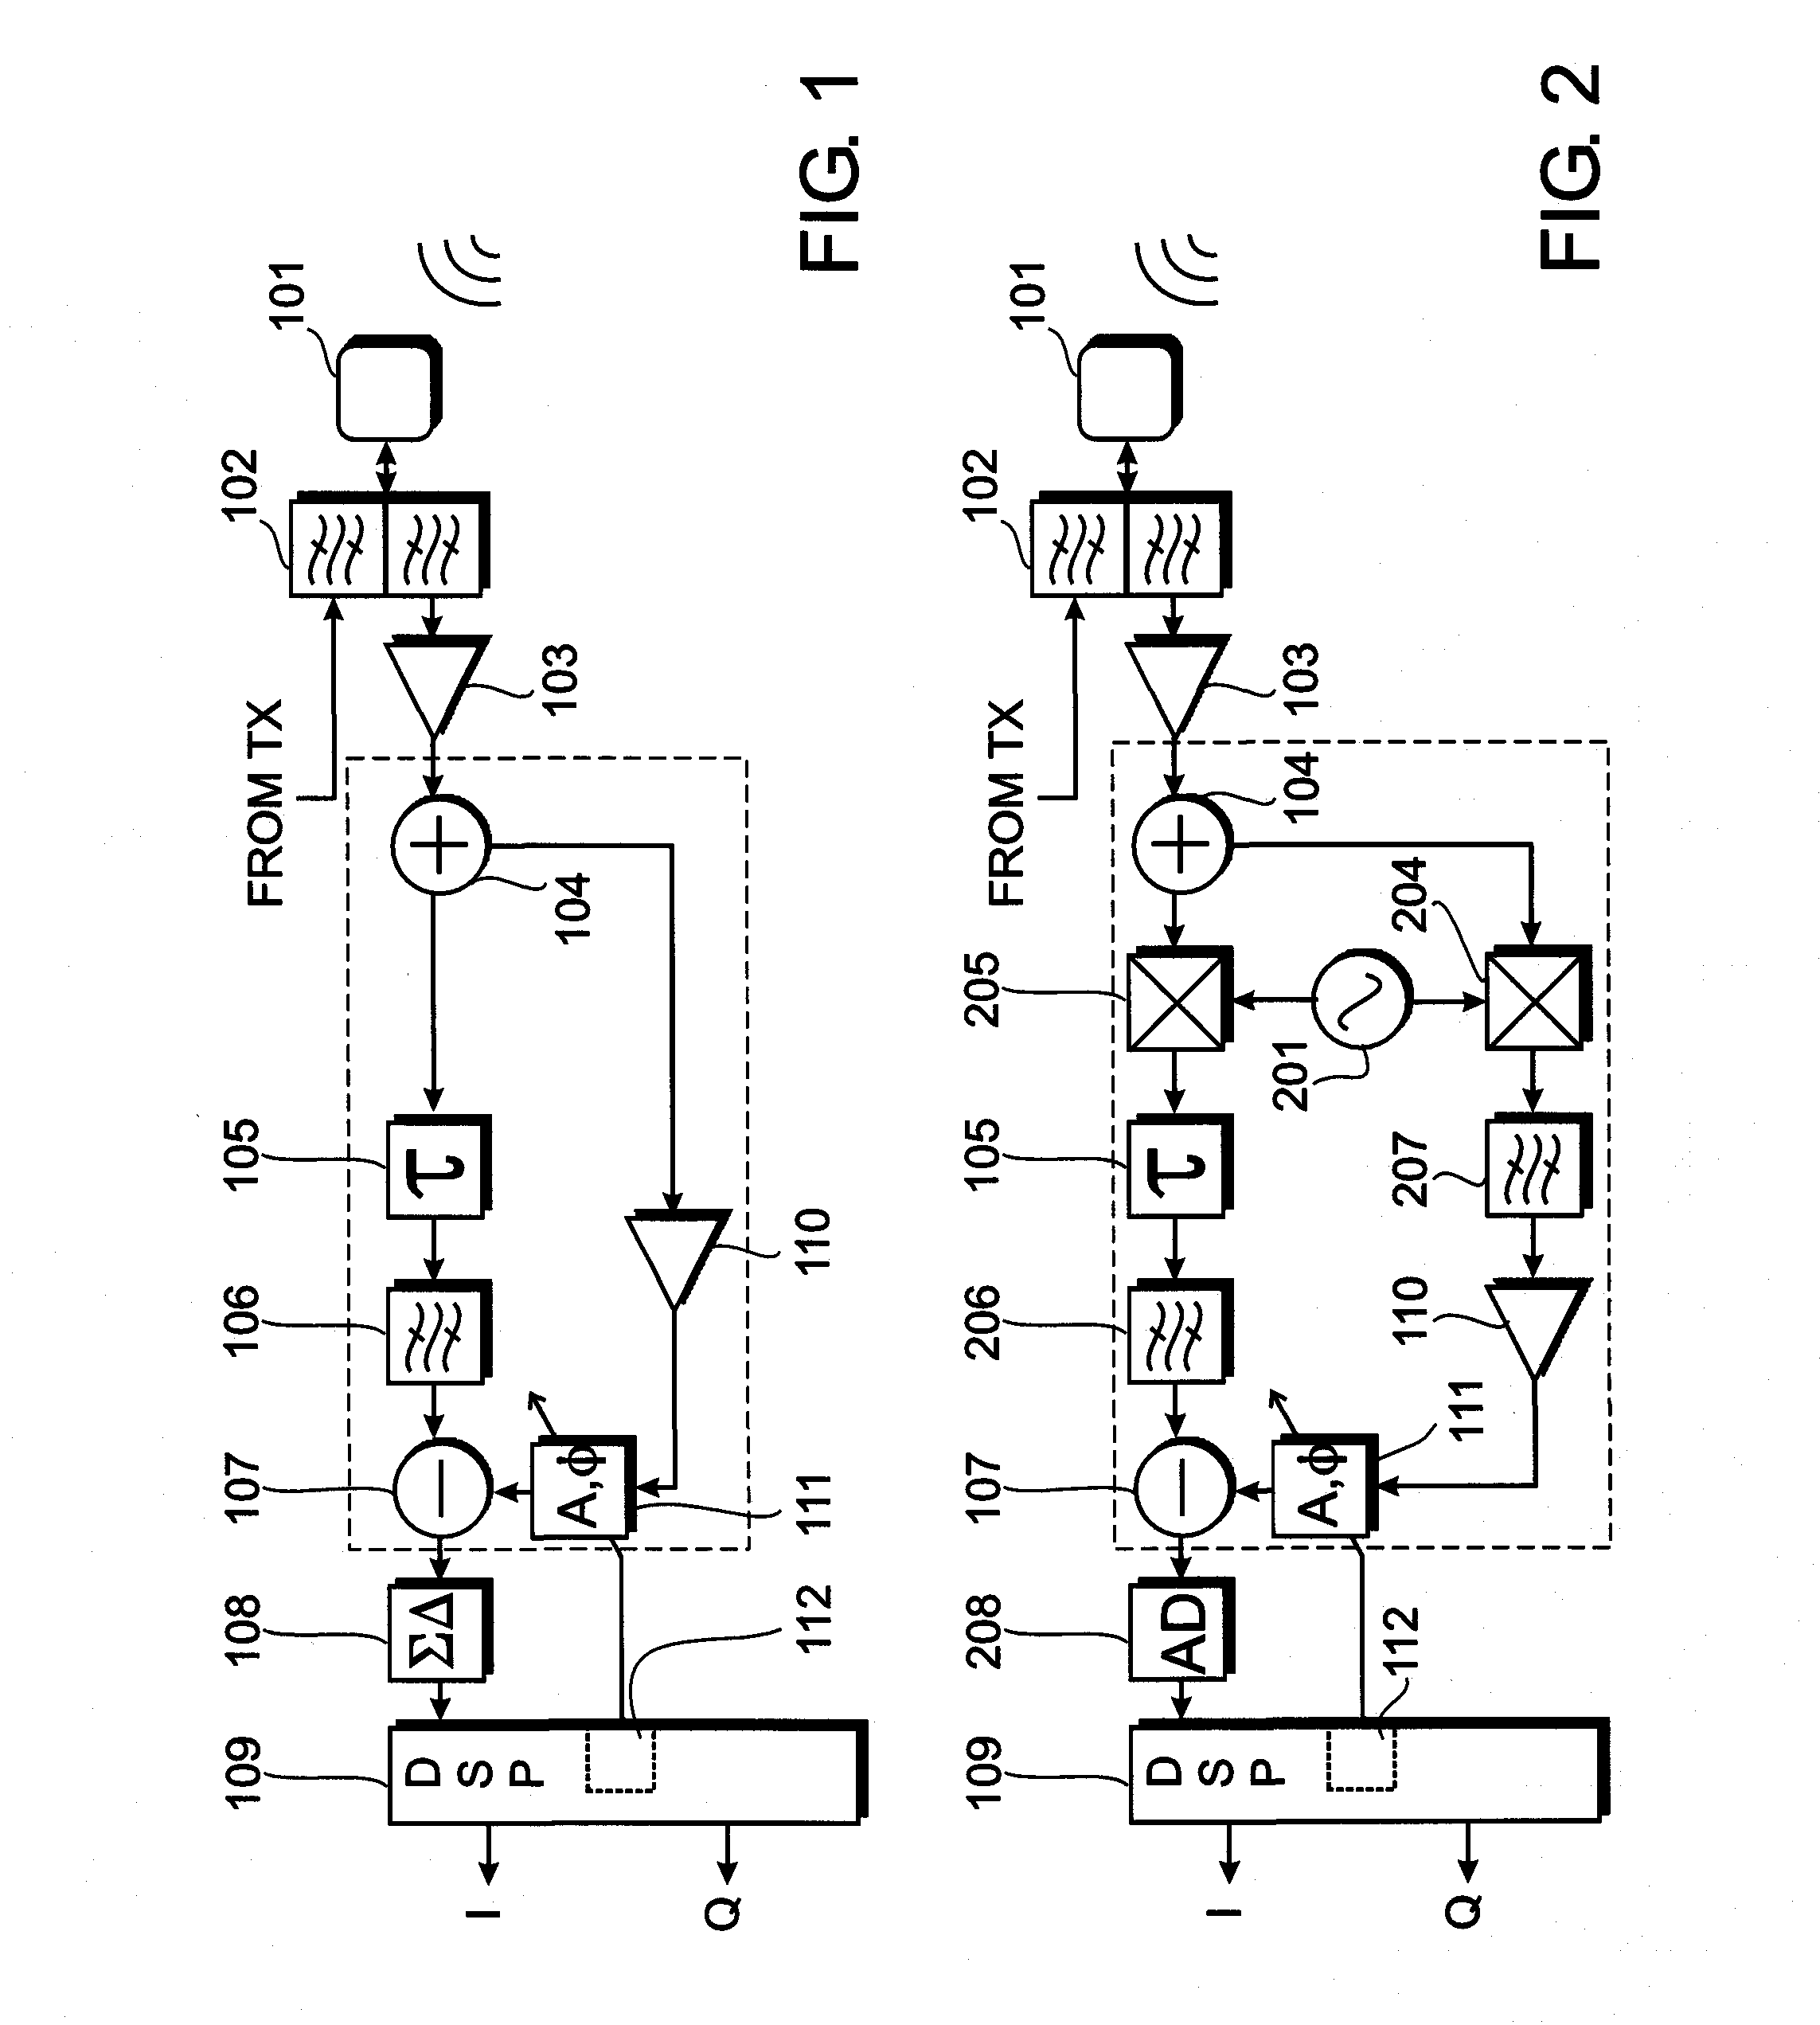 Mismatched delay based interference cancellation device and method